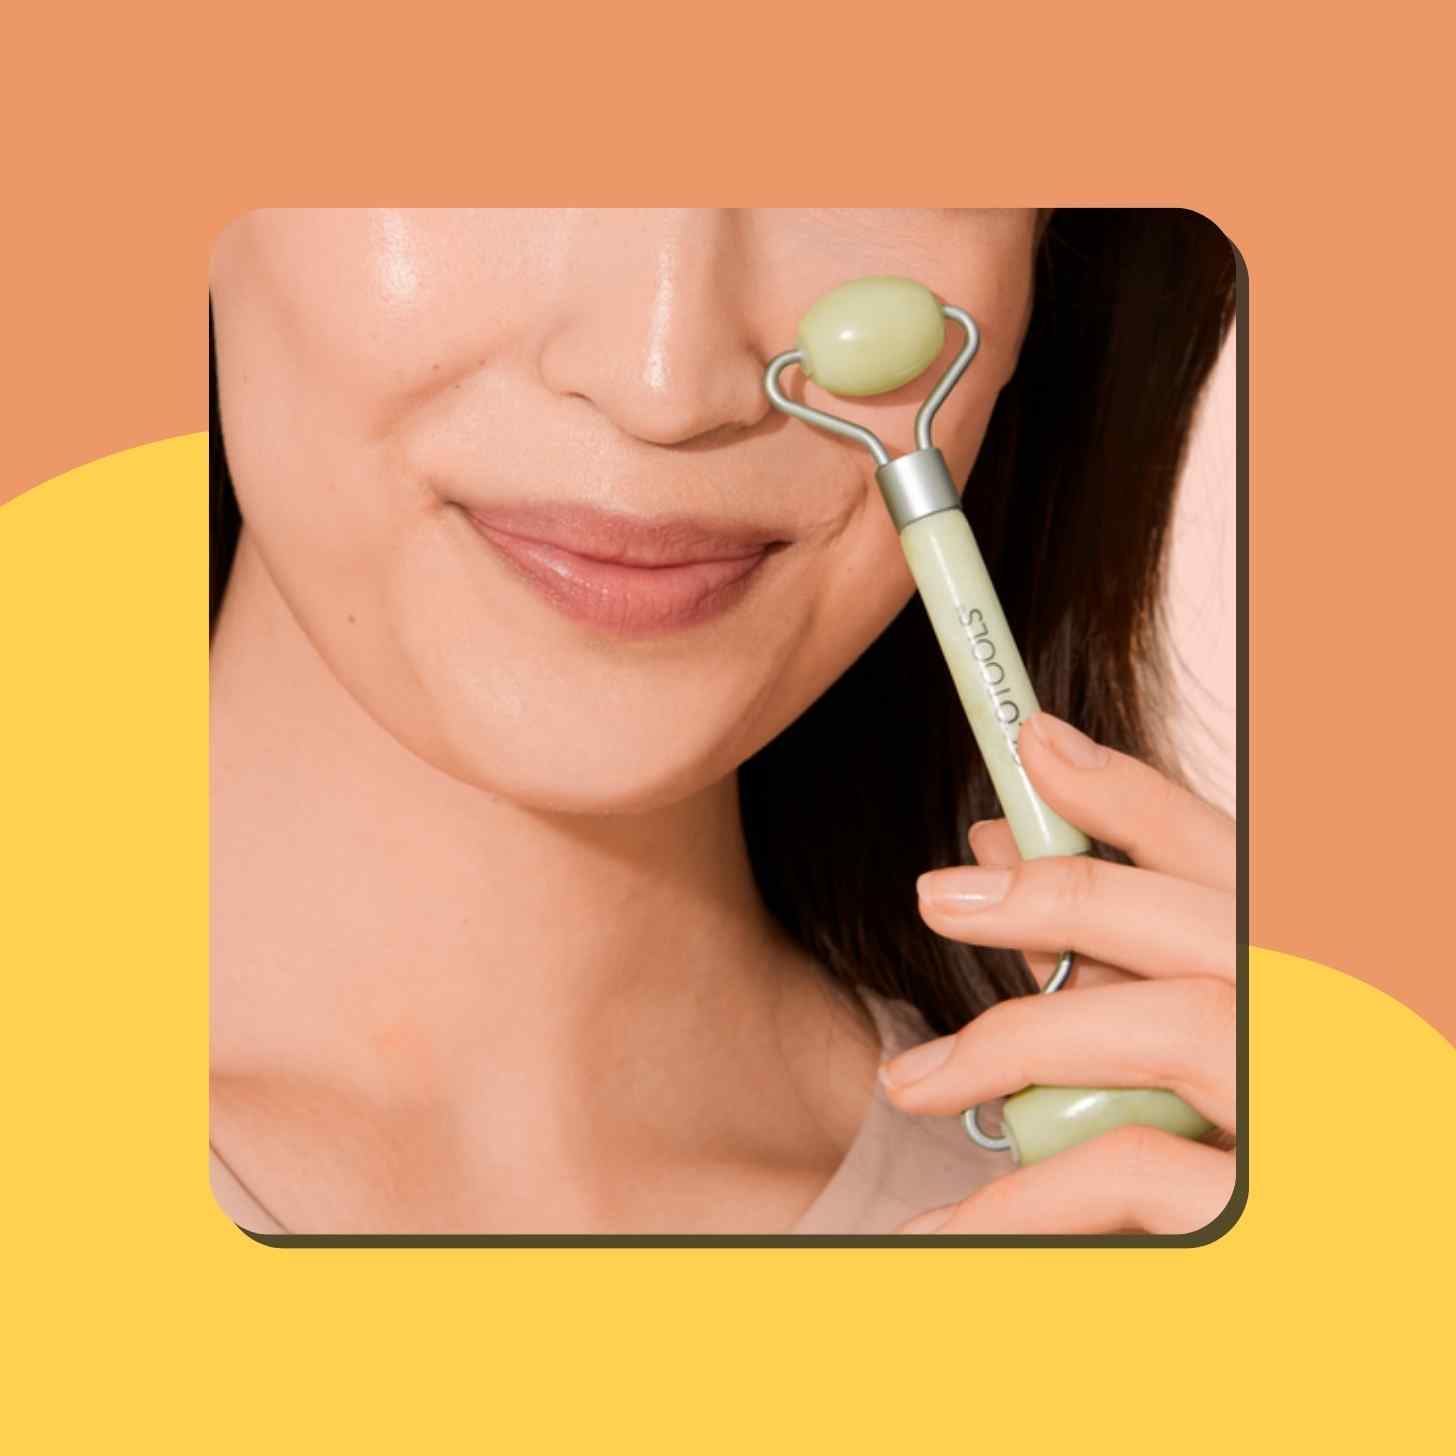 A Person Using A Jade Facial Roller On Their Skin